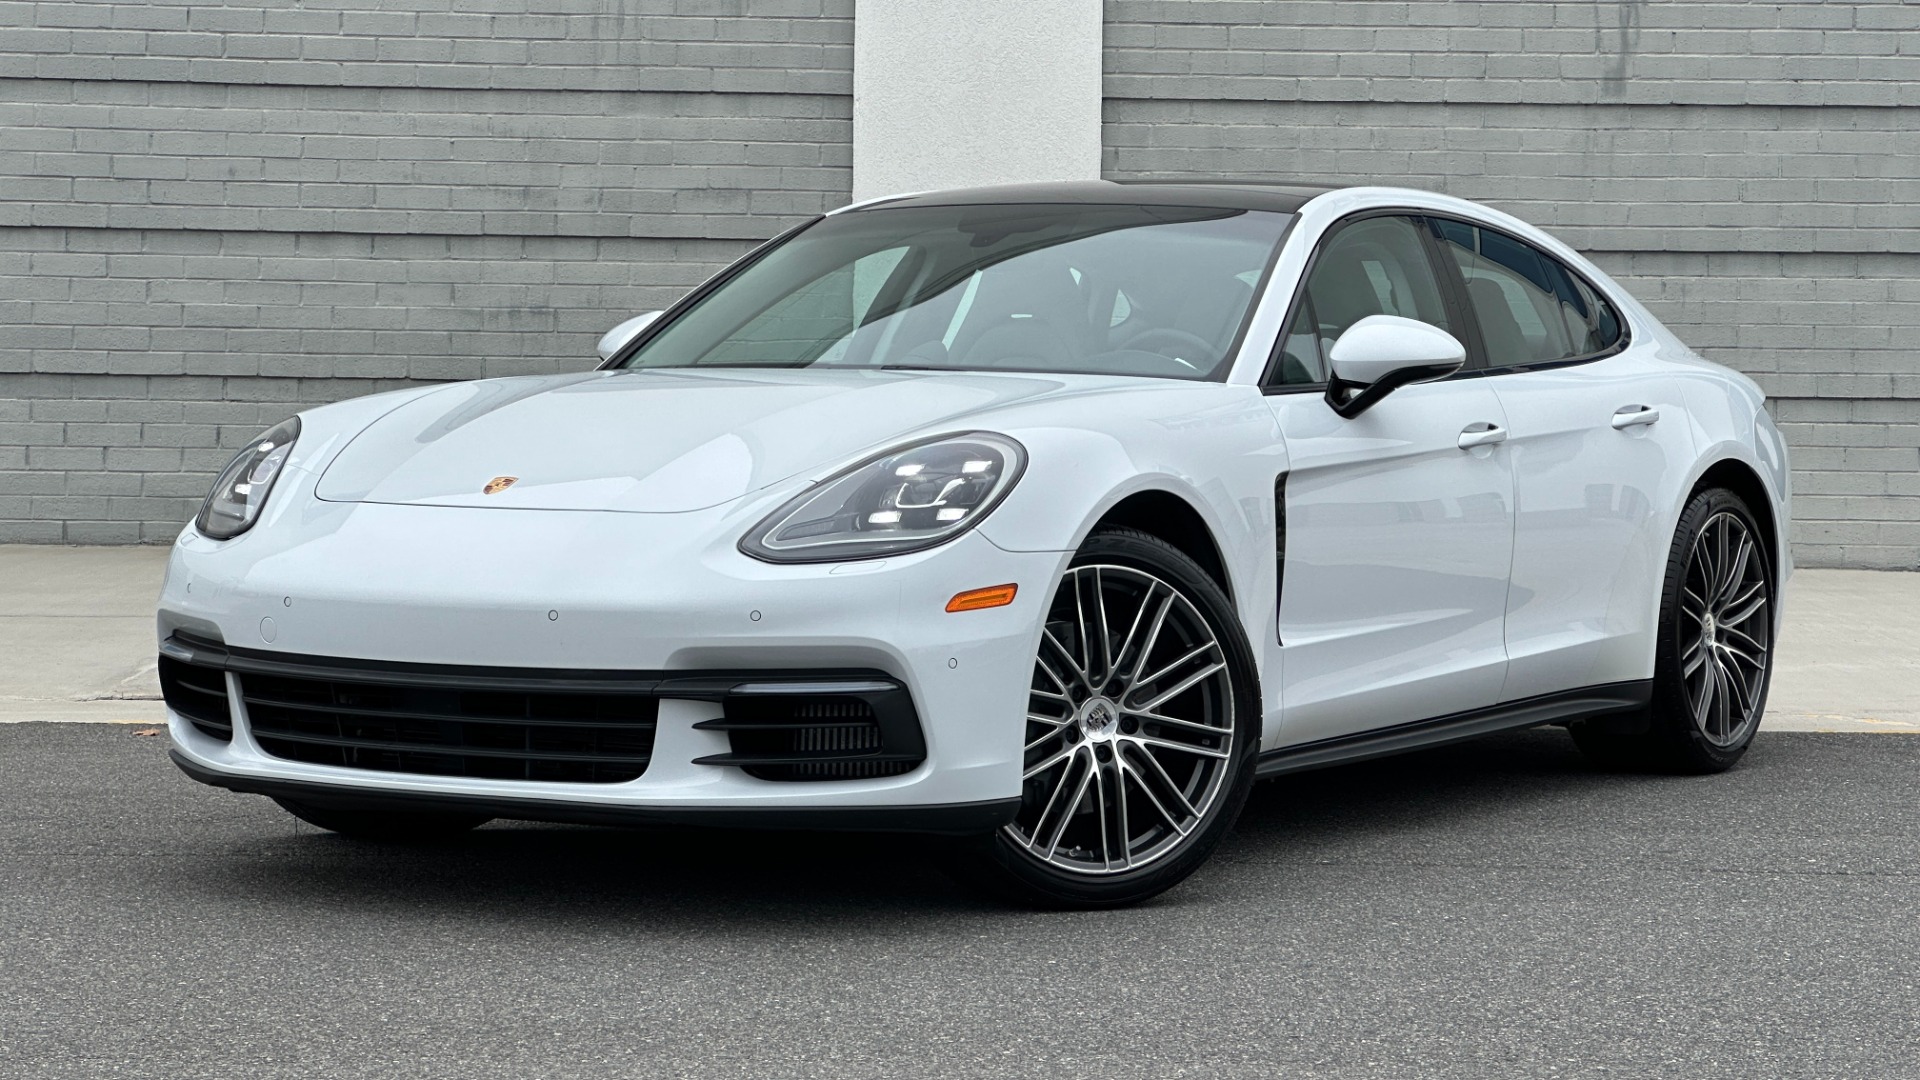 Used 2017 Porsche Panamera 4S / PREMIUM PLUS / AIR SUSPENSION / SPORT CHRONO / 21IN WHEELS for sale $74,000 at Formula Imports in Charlotte NC 28227 1